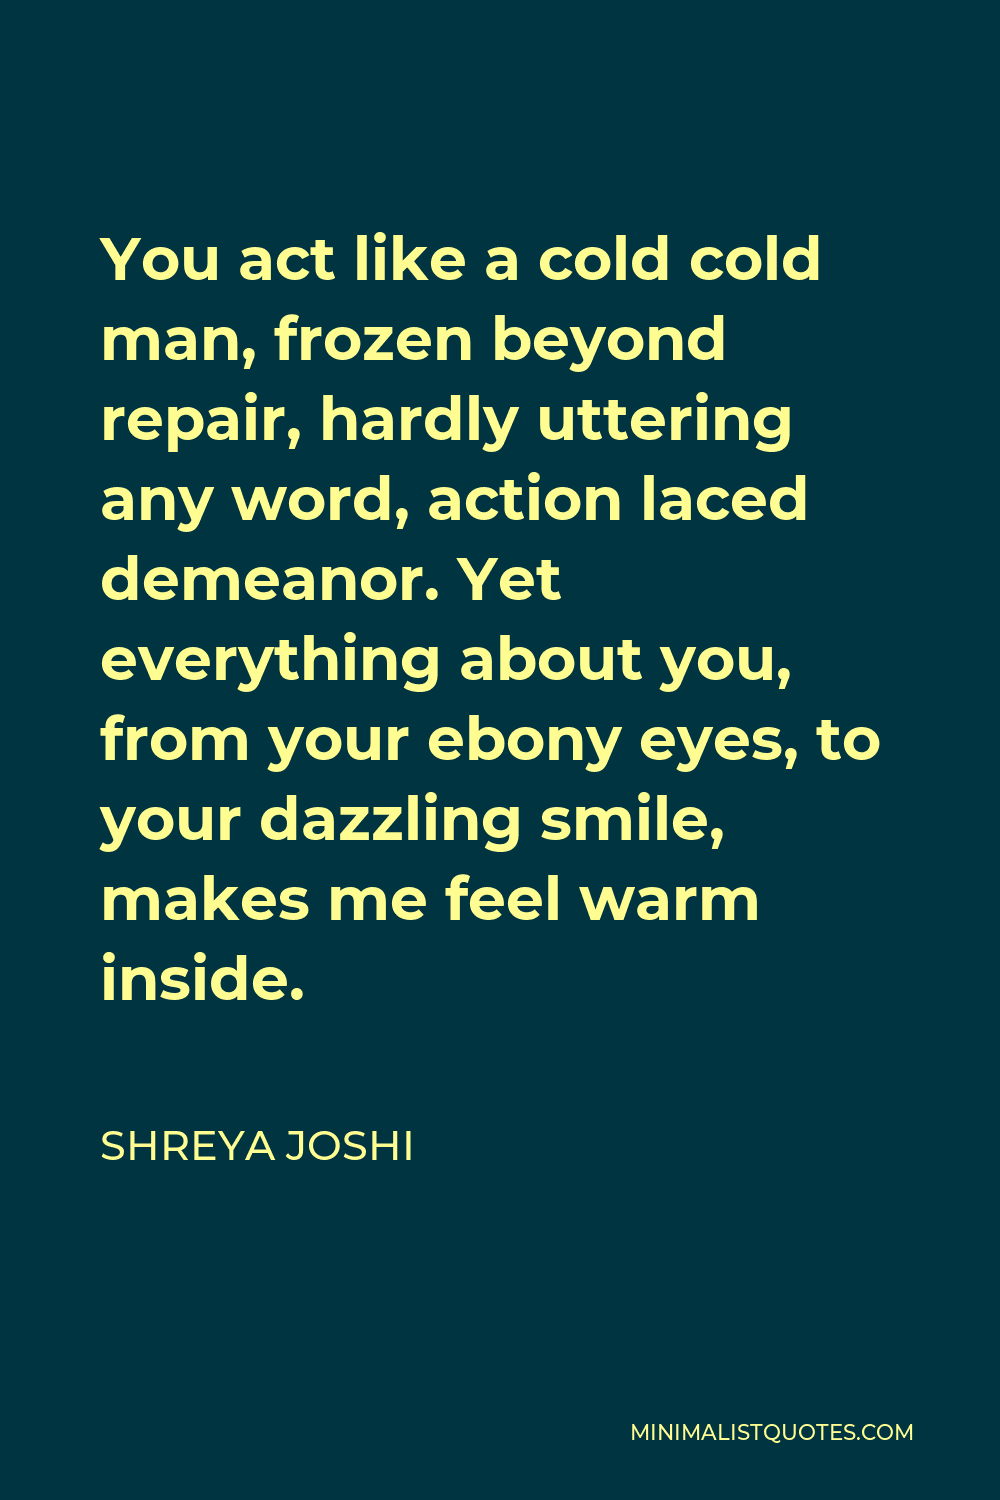 Shreya Joshi Quote - You act like a cold cold man, frozen beyond repair, hardly uttering any word, action laced demeanor. Yet everything about you, from your ebony eyes, to your dazzling smile, makes me feel warm inside.